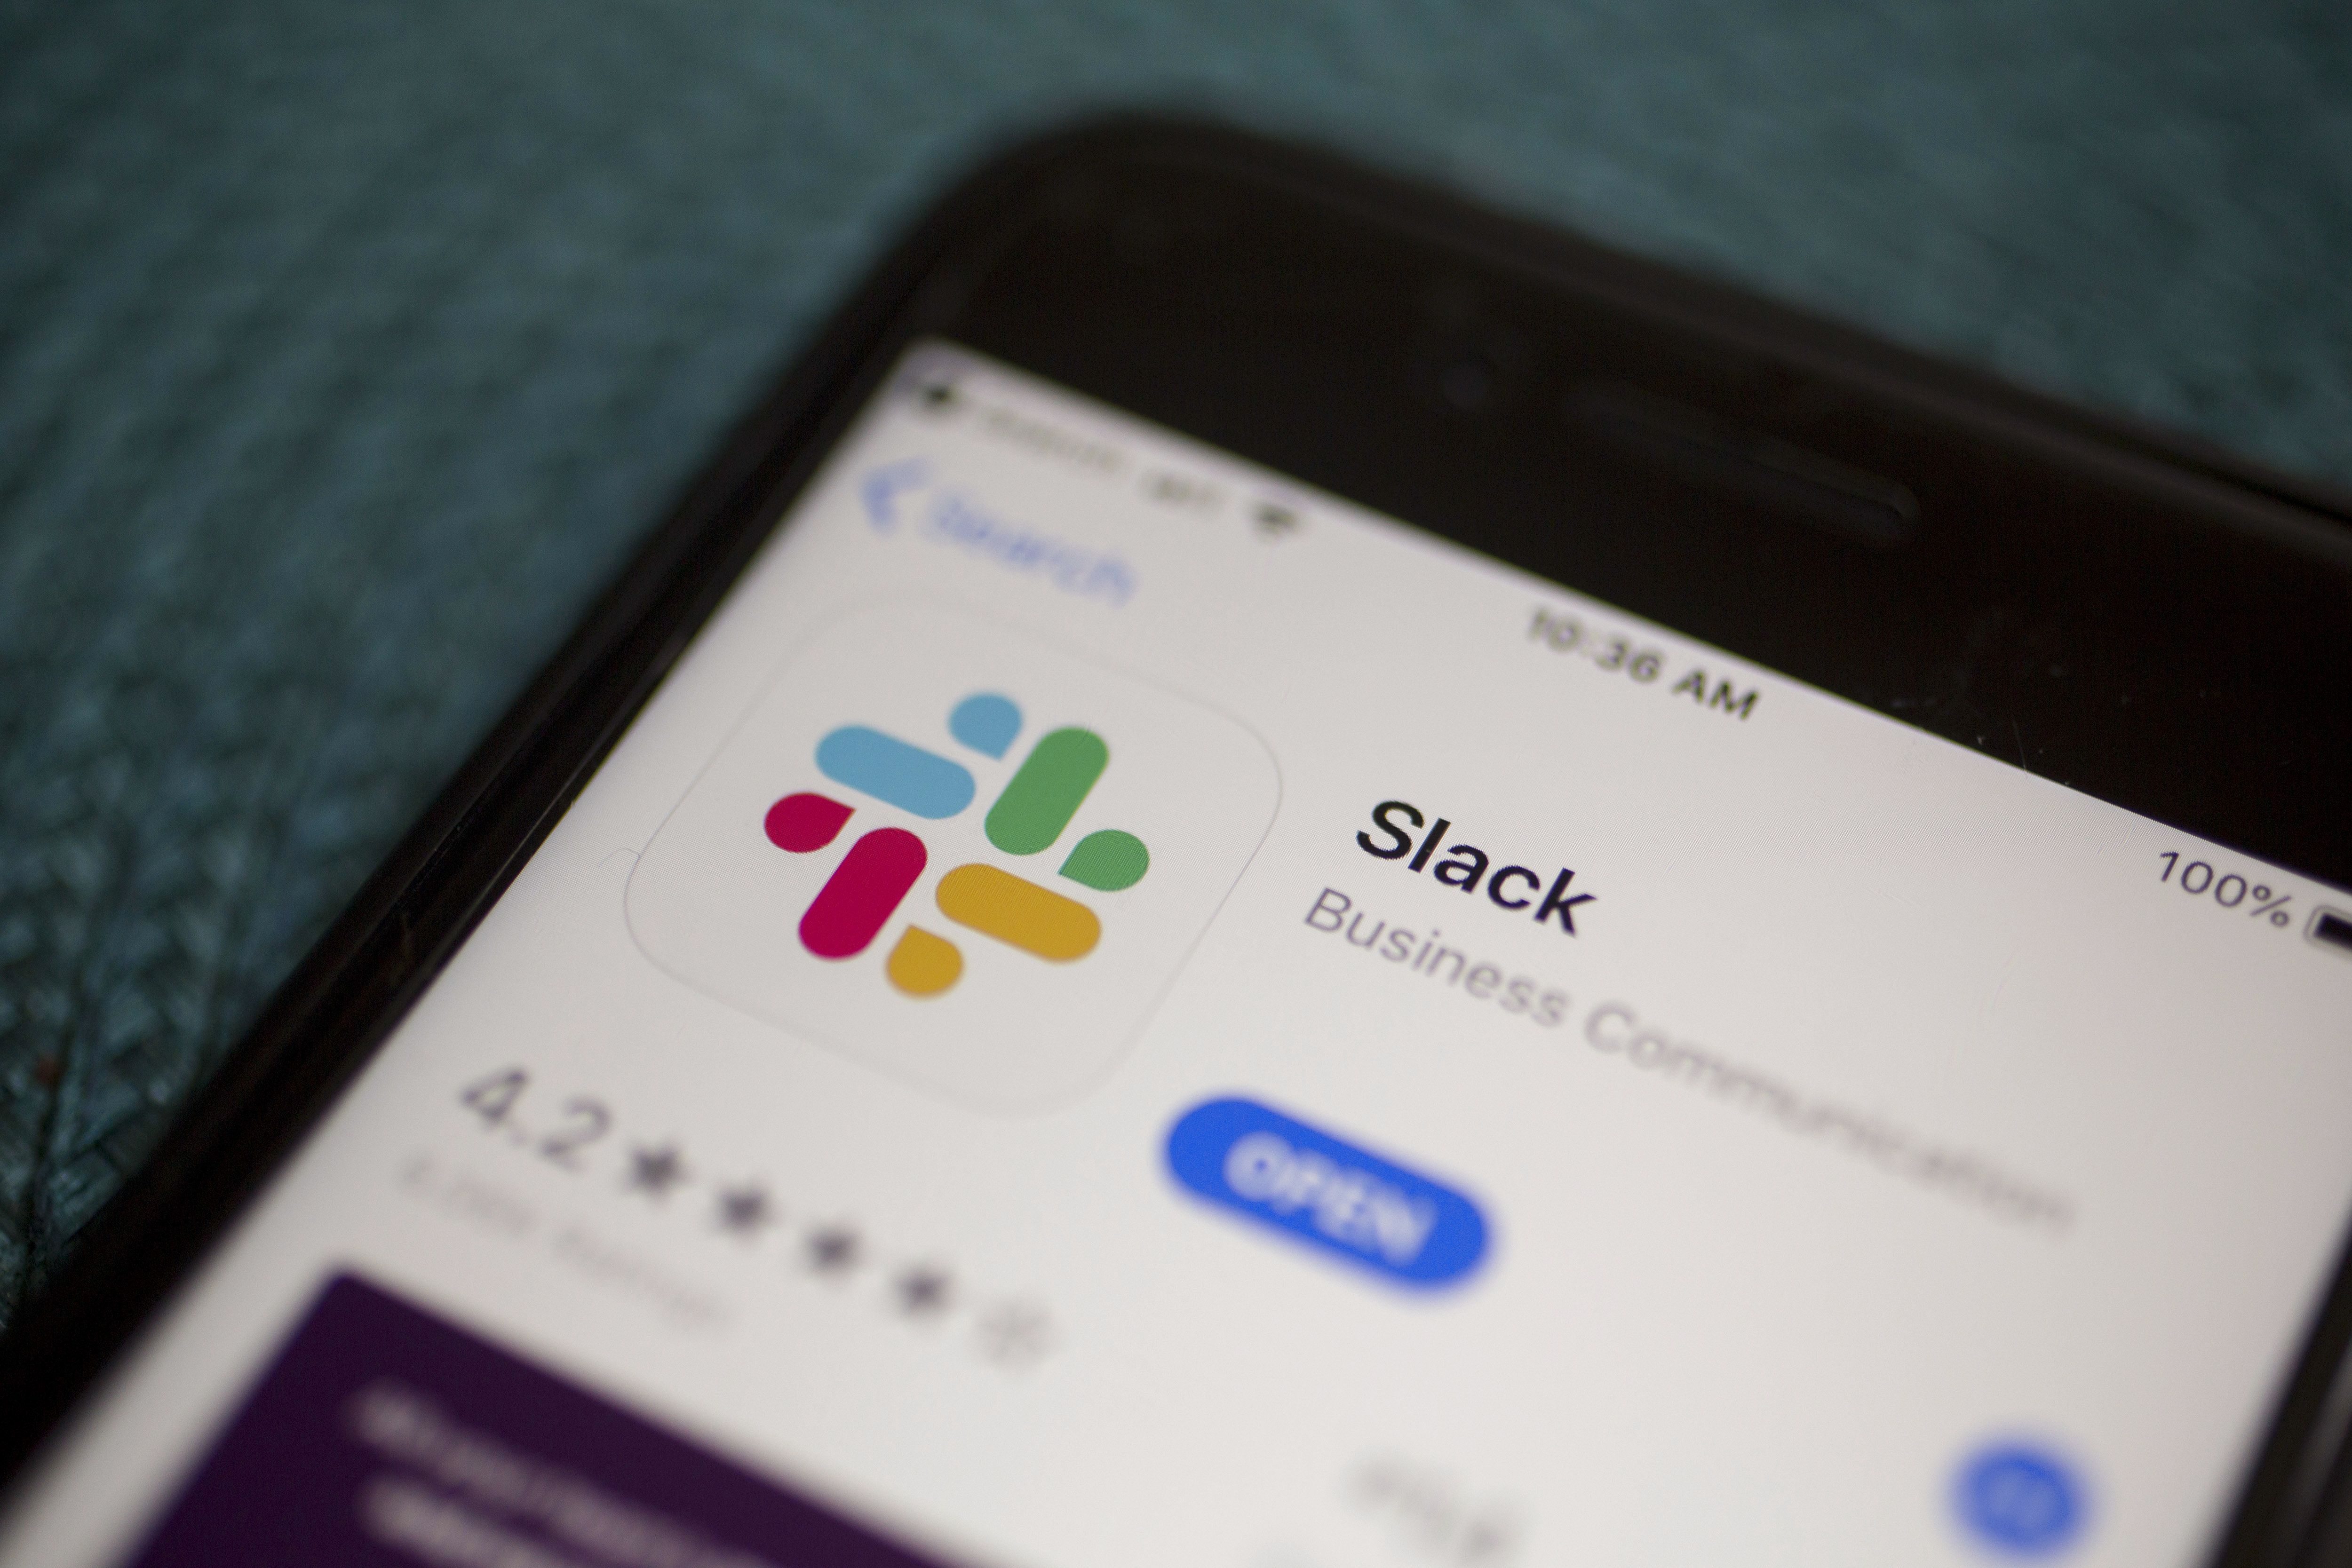 Slack could rally in debut — stay disciplined, buy under $40